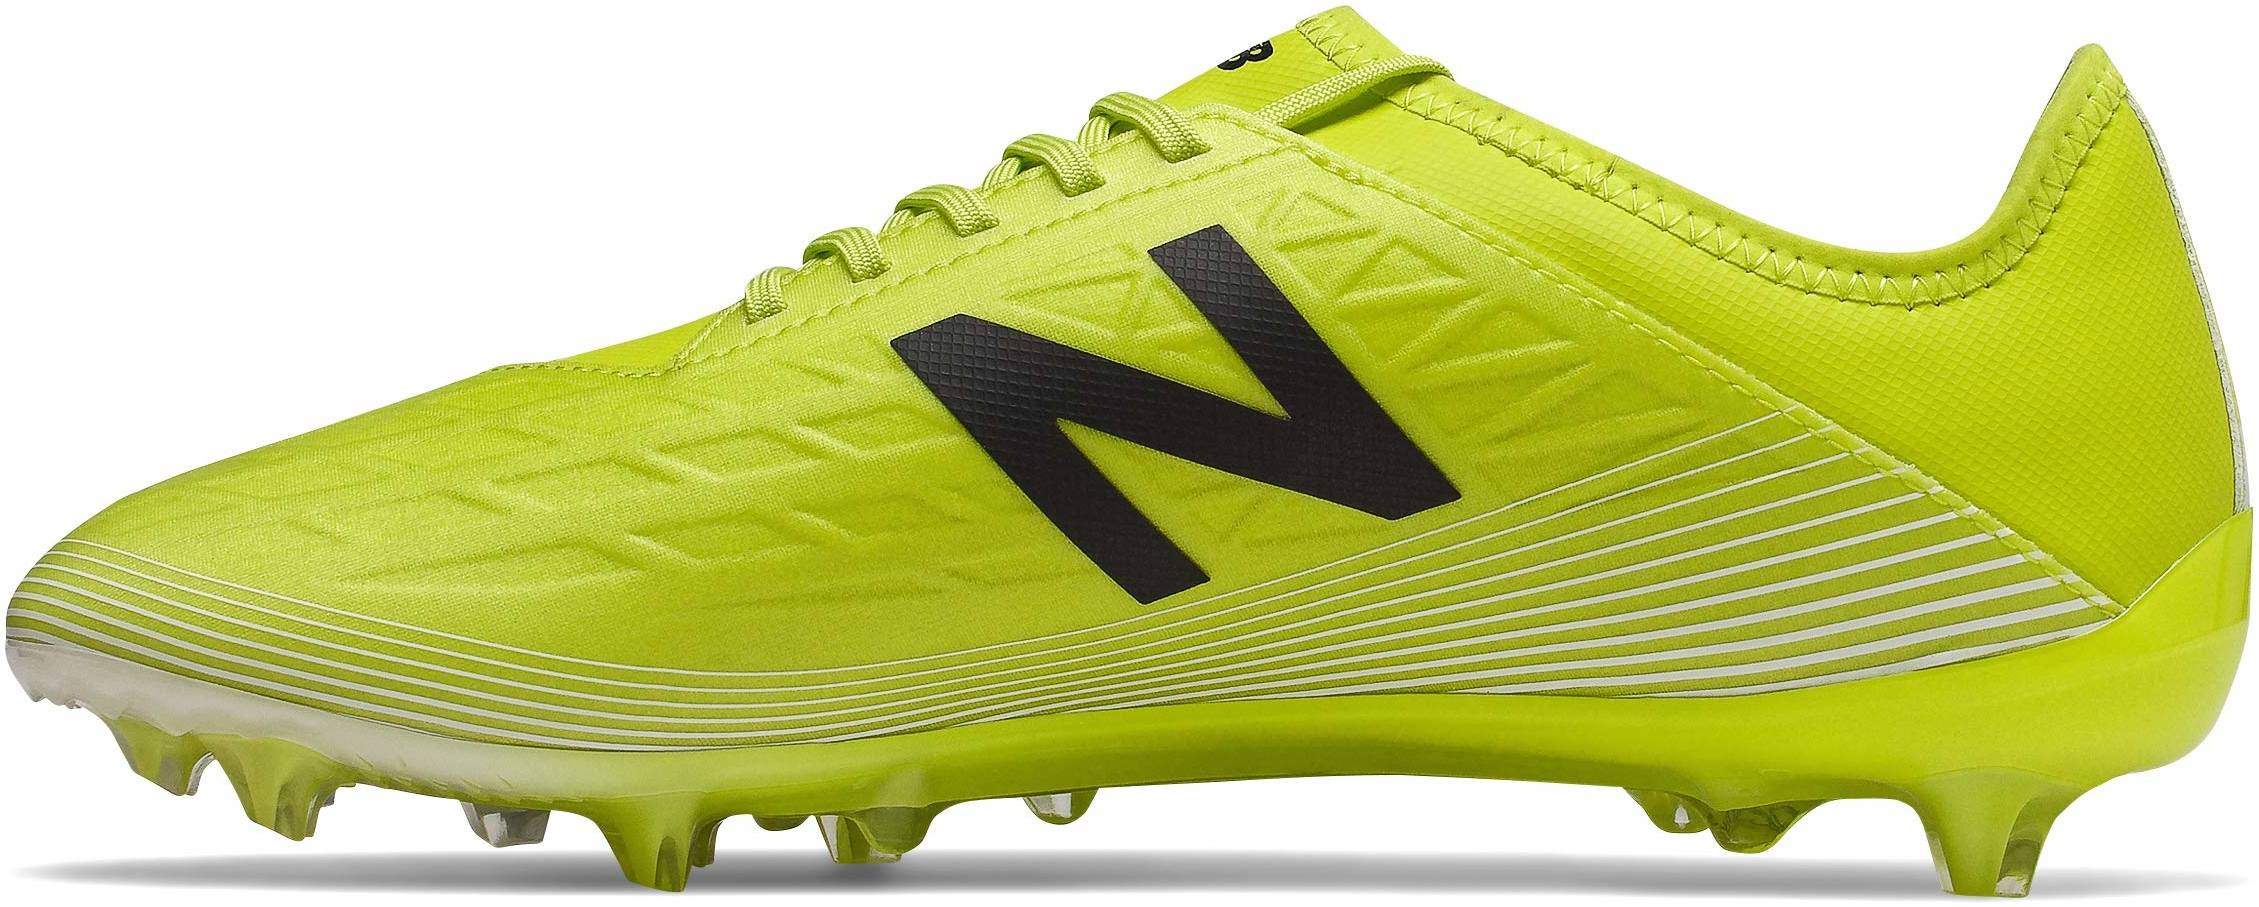 New Balance Furon Pro V5 Firm Ground - Deals ($53), Facts, Reviews ...